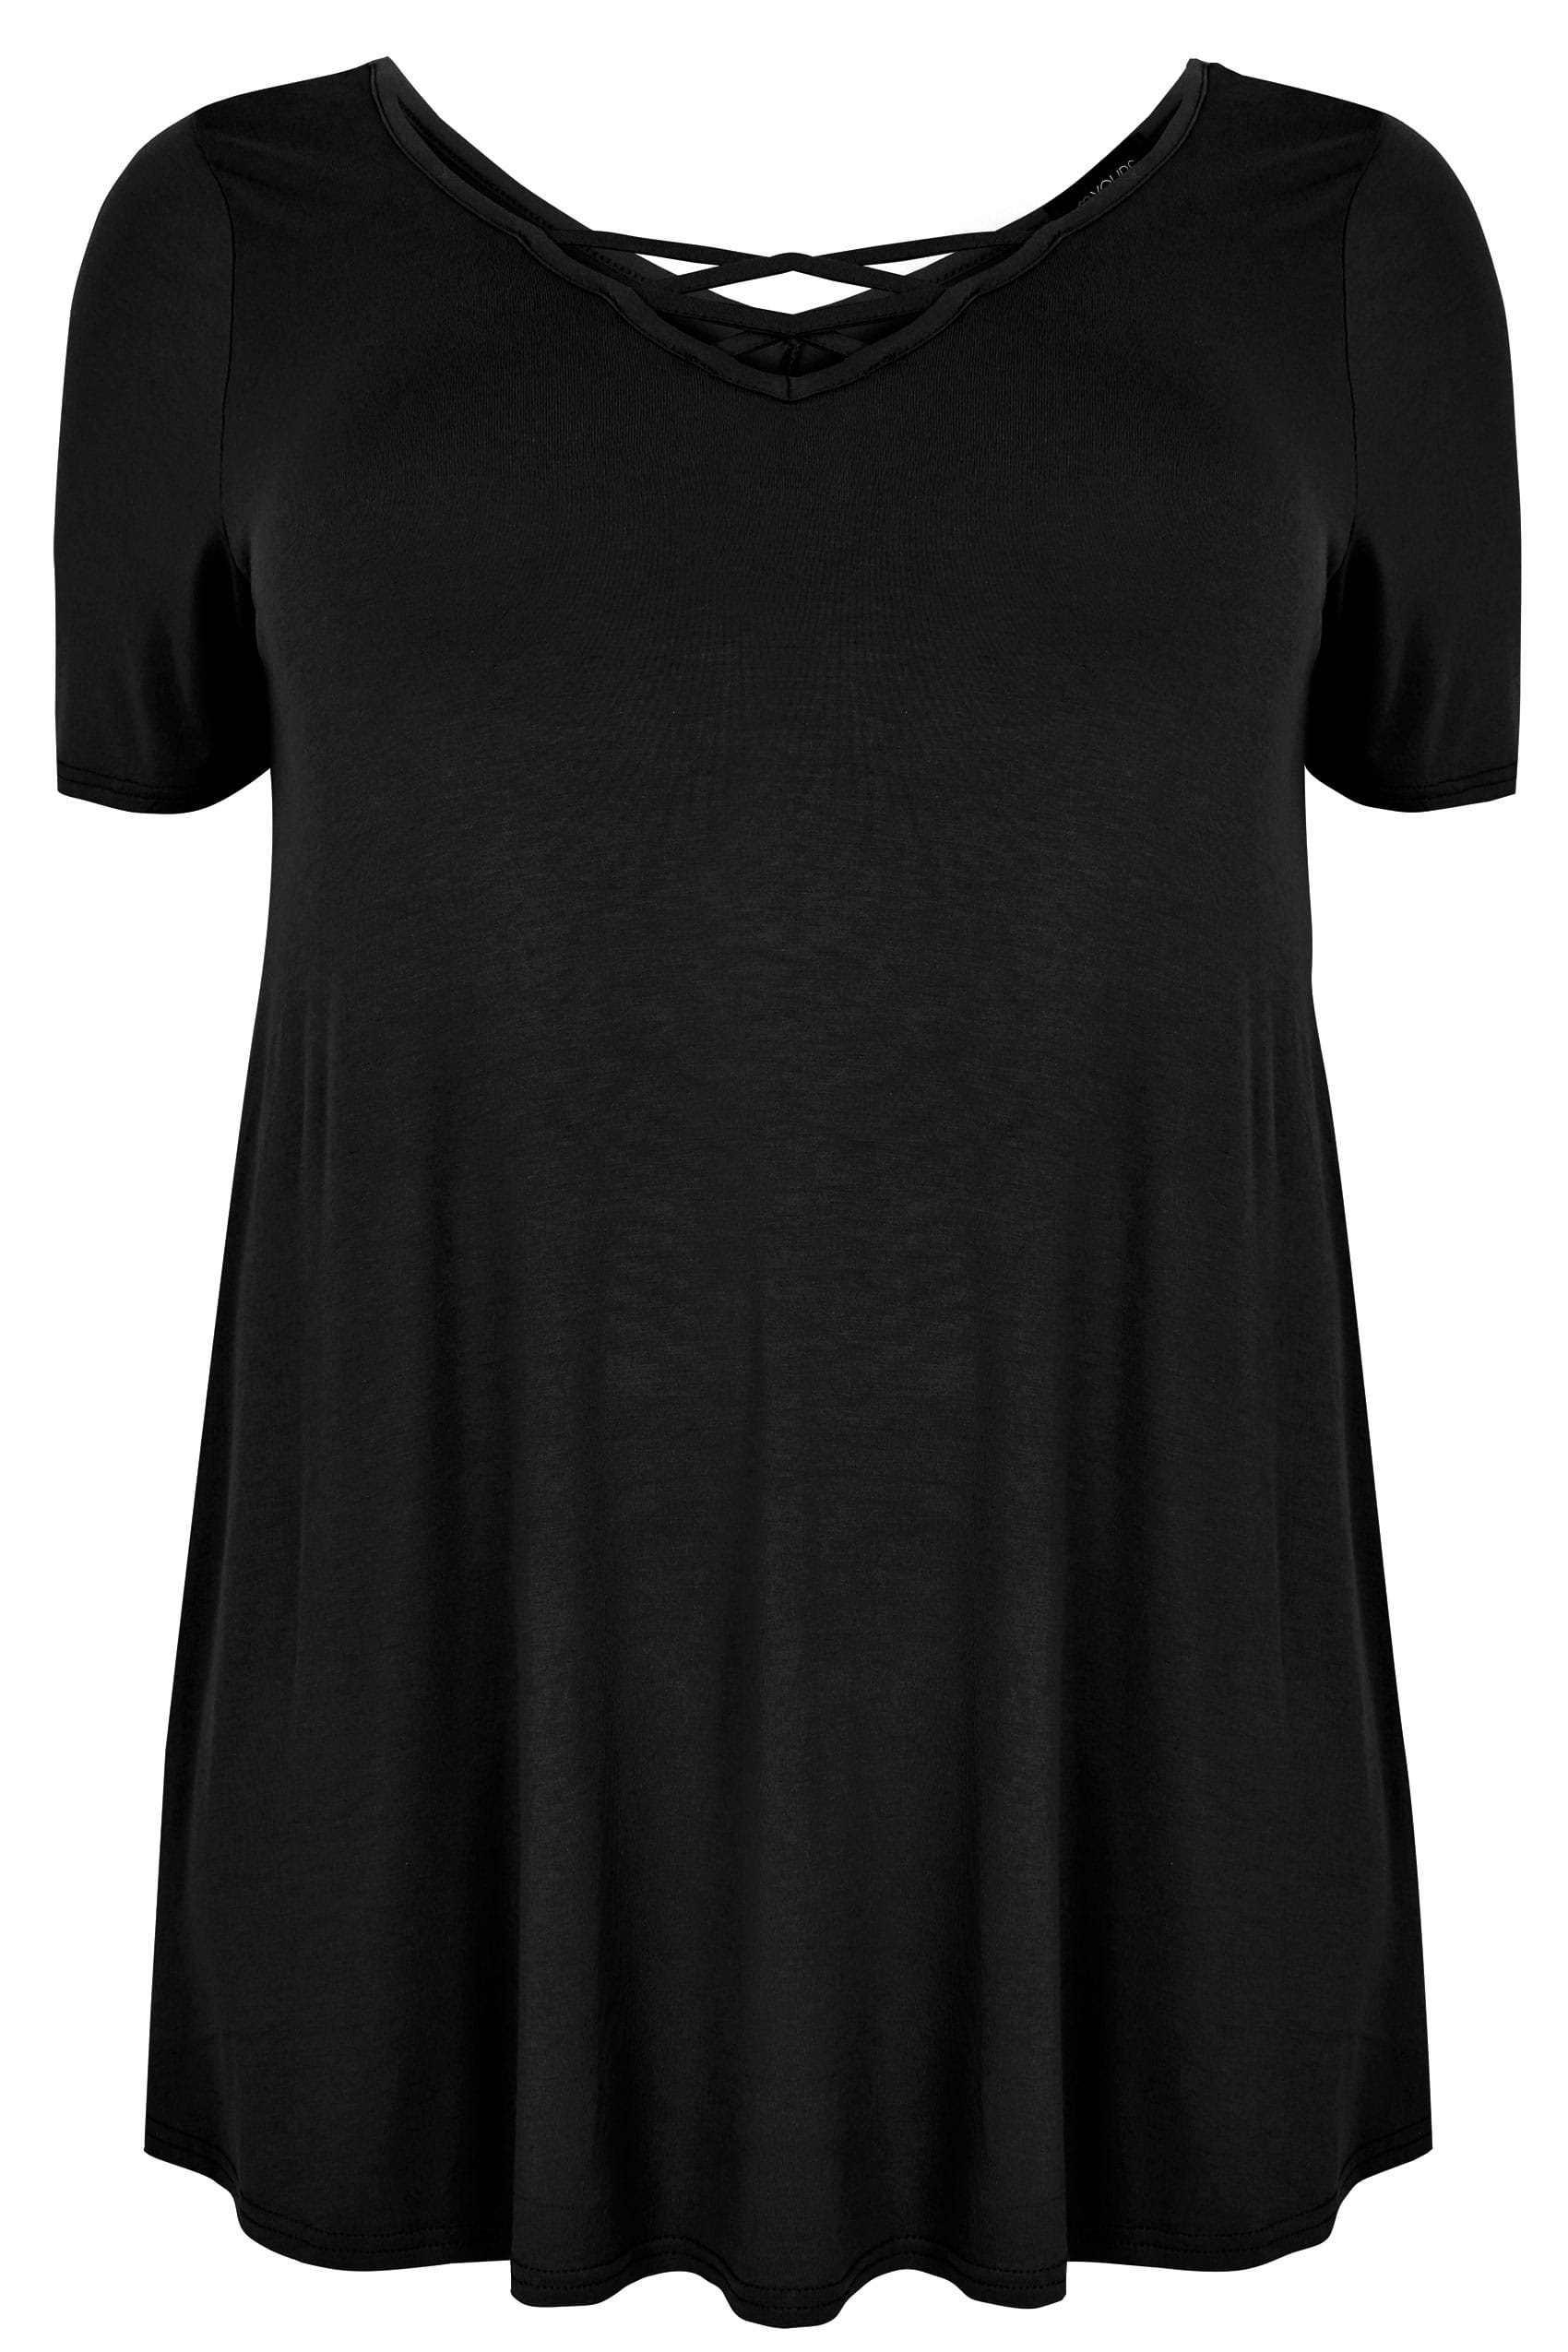 Black Jersey T-shirt With Cross Over Straps, Plus size 16 to 36